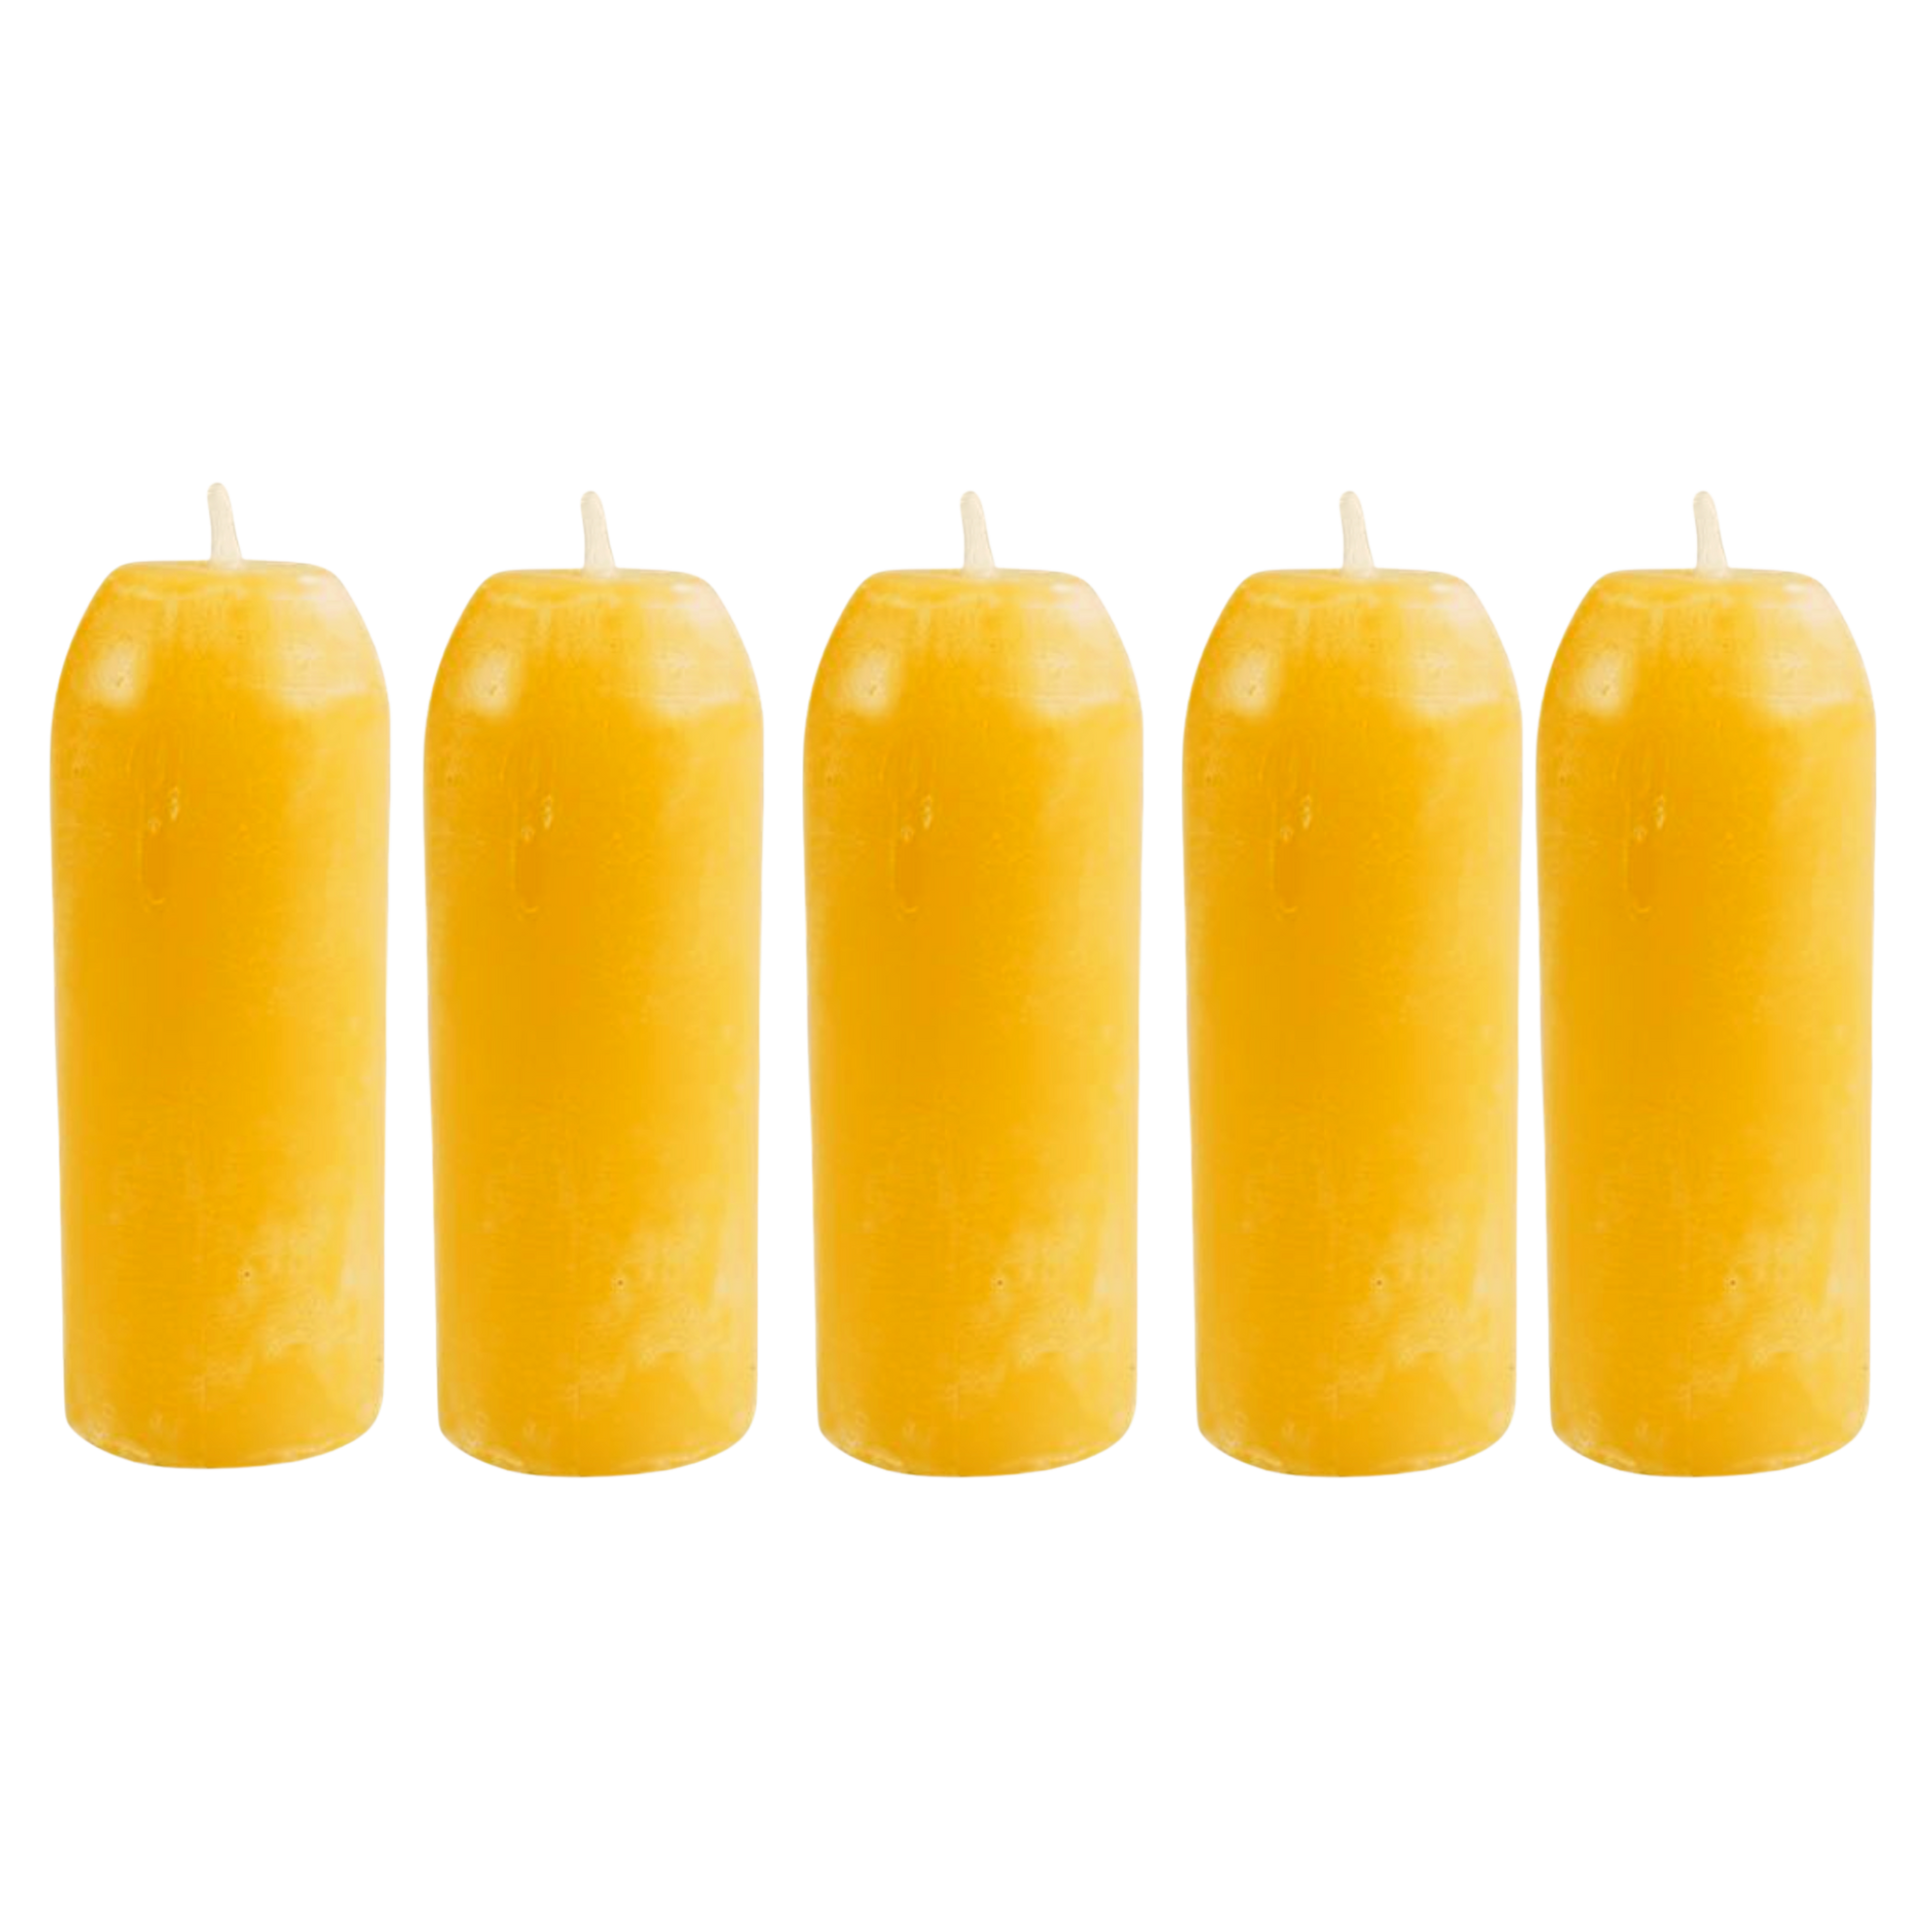 15-Hour Natural Beeswax Candles Compatible with UCO Candle Lanterns -  Smokeless Clean Long Lasting Burning for Outdoor, Camping, Emergency,  Survival